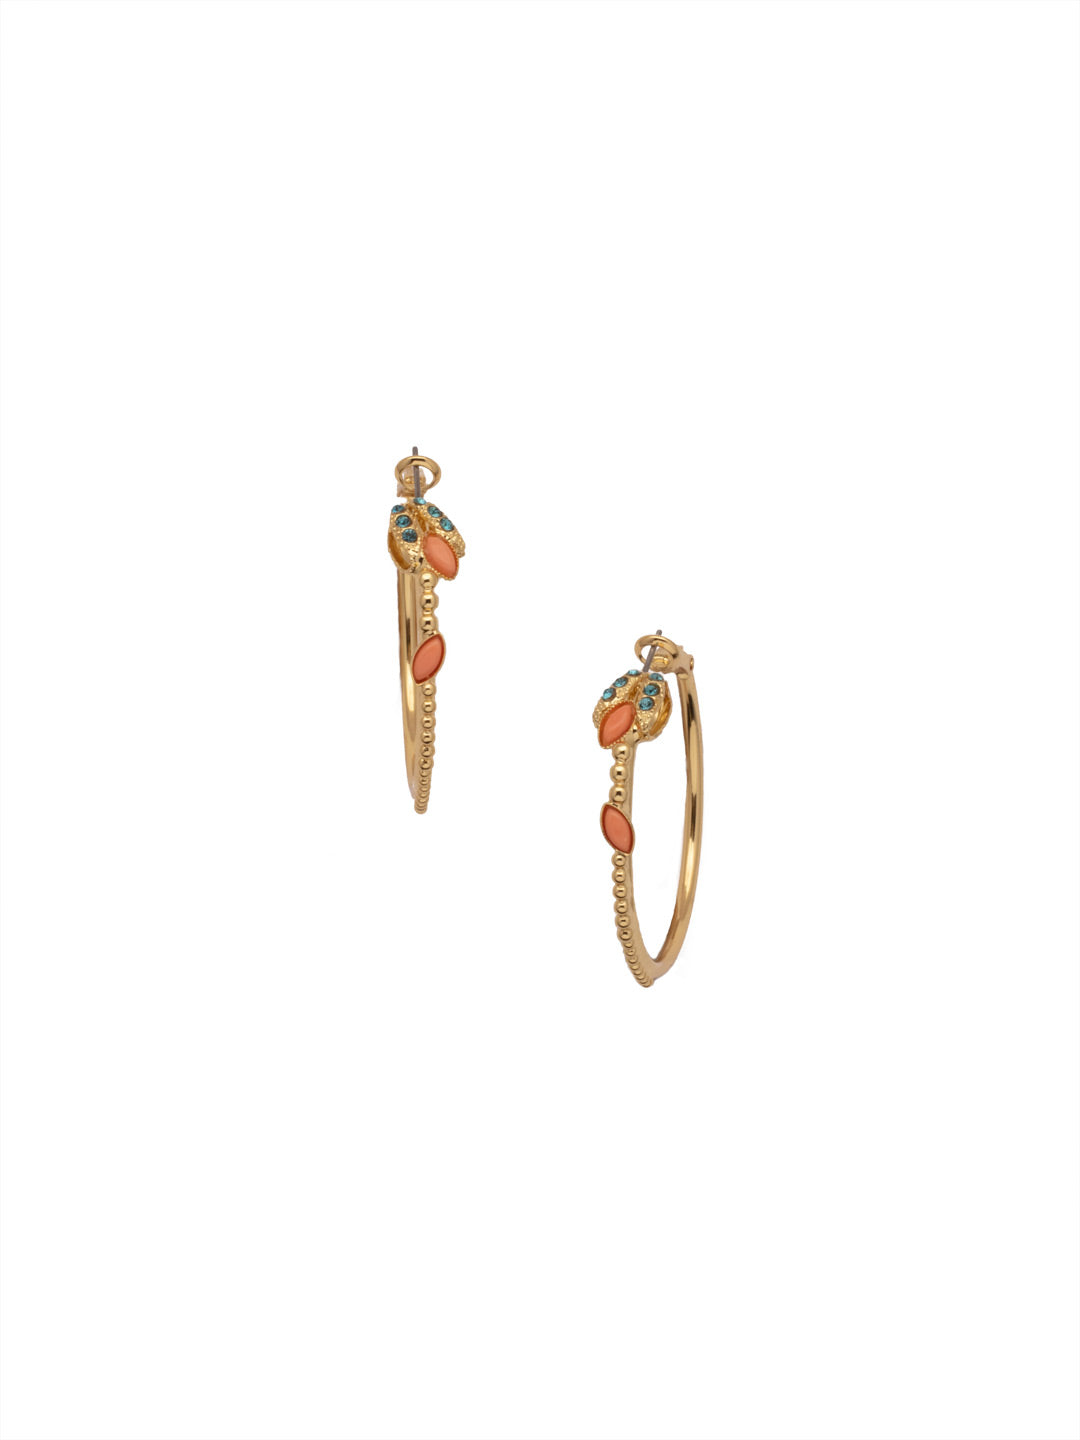 Sandy Hoop Earring - EEZ17BGSOP - <p>The Sandy Hoop Earrings feature a classic hoop, embellished with various sizes and colors of crystals and stones. From Sorrelli's South Pacific collection in our Bright Gold-tone finish.</p>